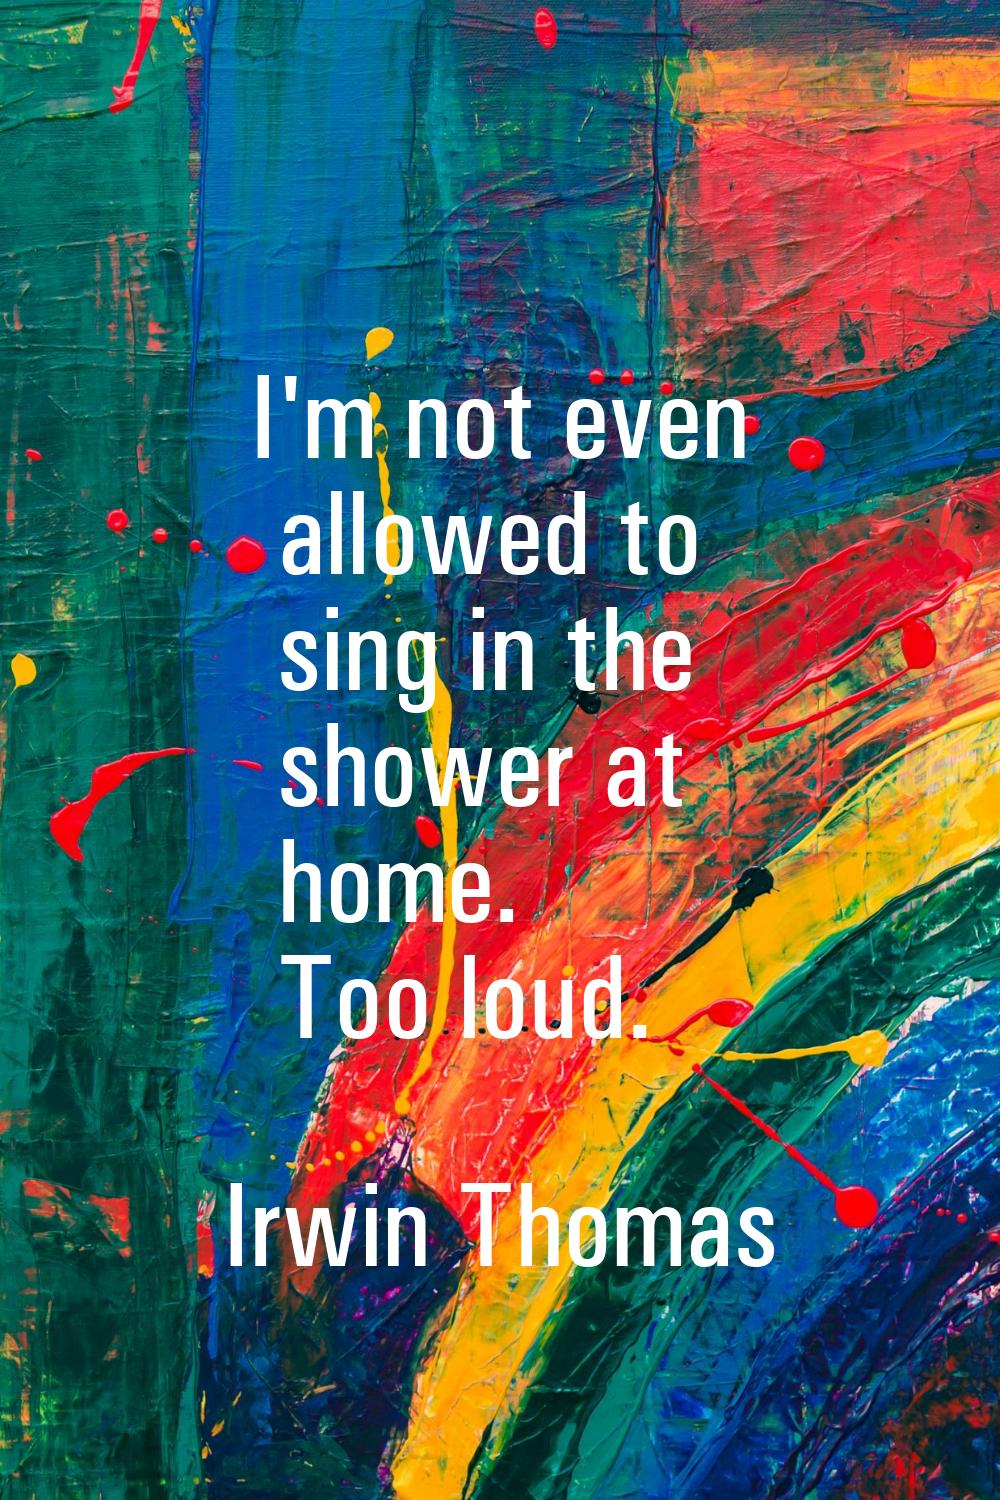 I'm not even allowed to sing in the shower at home. Too loud.